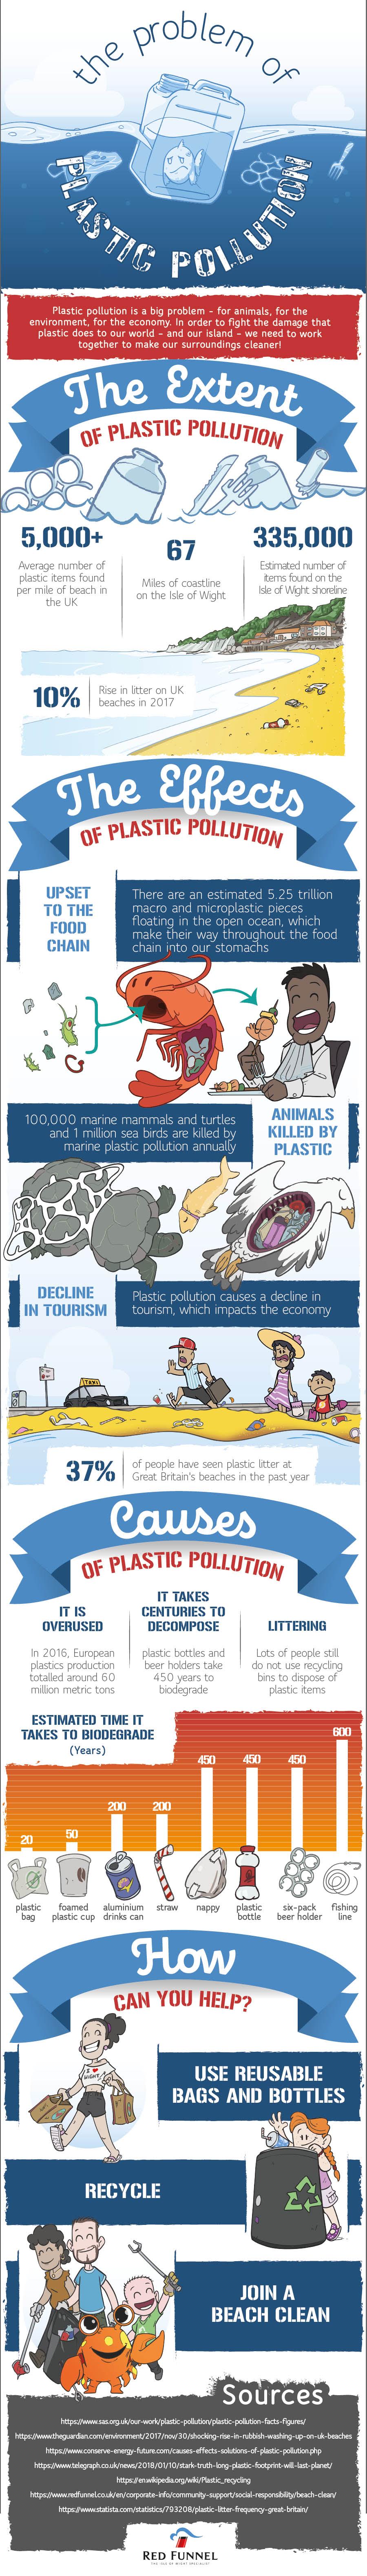 The Problem of Plastic Pollution #infographic 